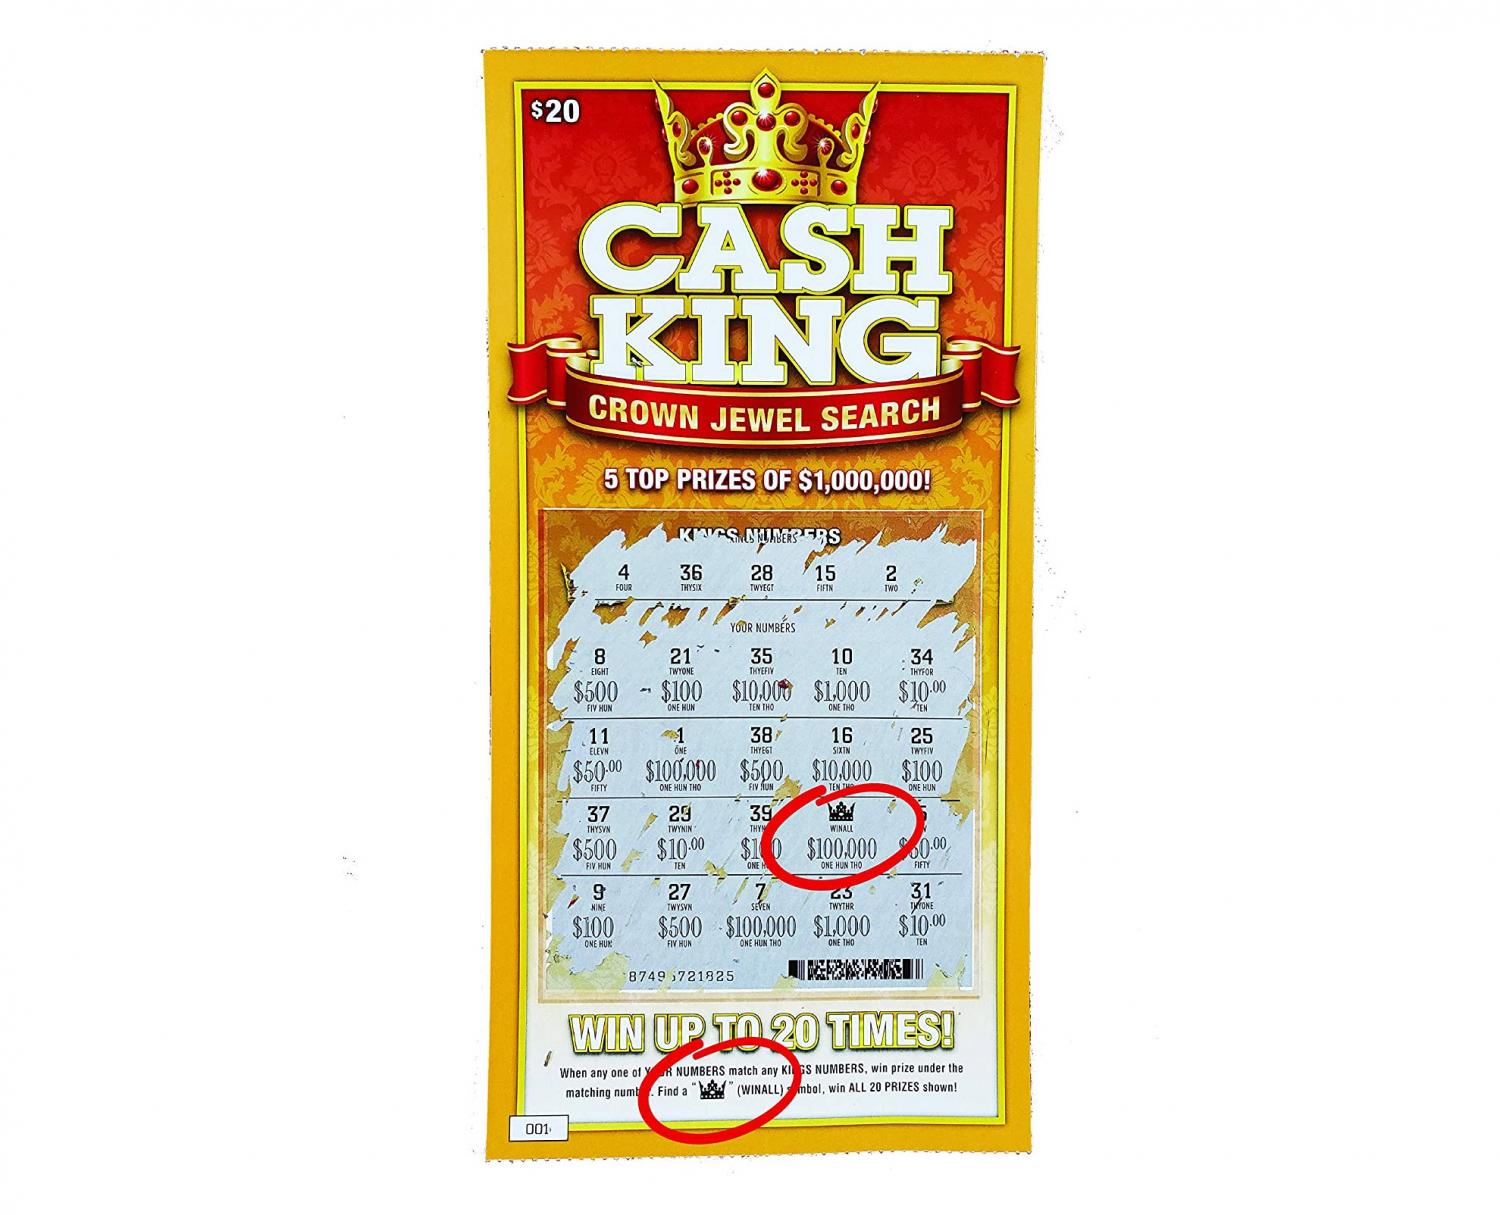 Prank Scratch-Off Lottery Tickets That Always Show You Won The Jackpot